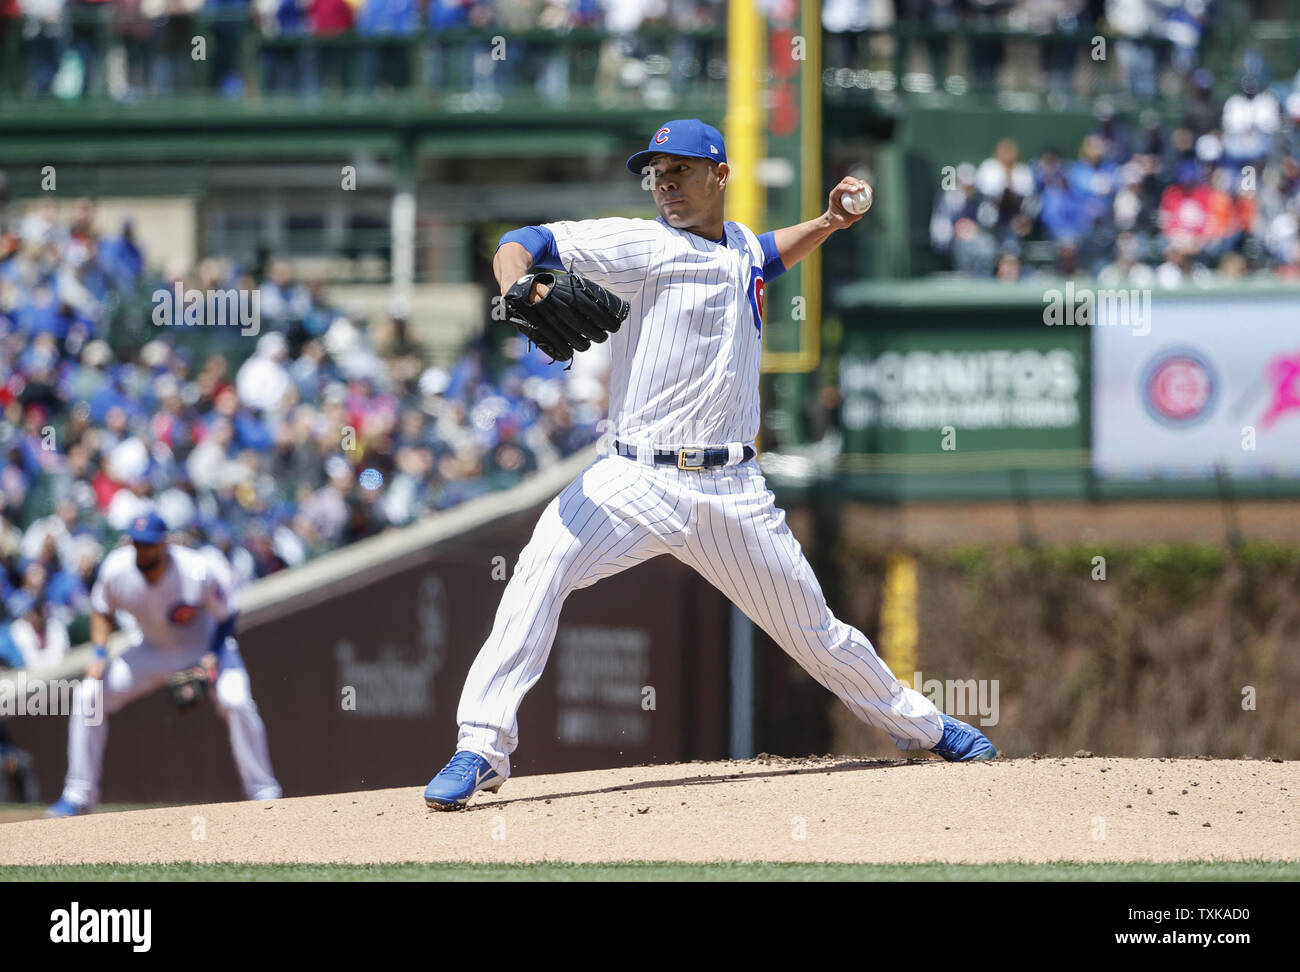 Chicago Cubs starting pitcher Jose Quintana delivers against the Milwaukee Brewers in the first inning at Wrigley Field on May 10, 2019 in Chicago. Photo by Kamil Krzaczynski/UPI Stock Photo